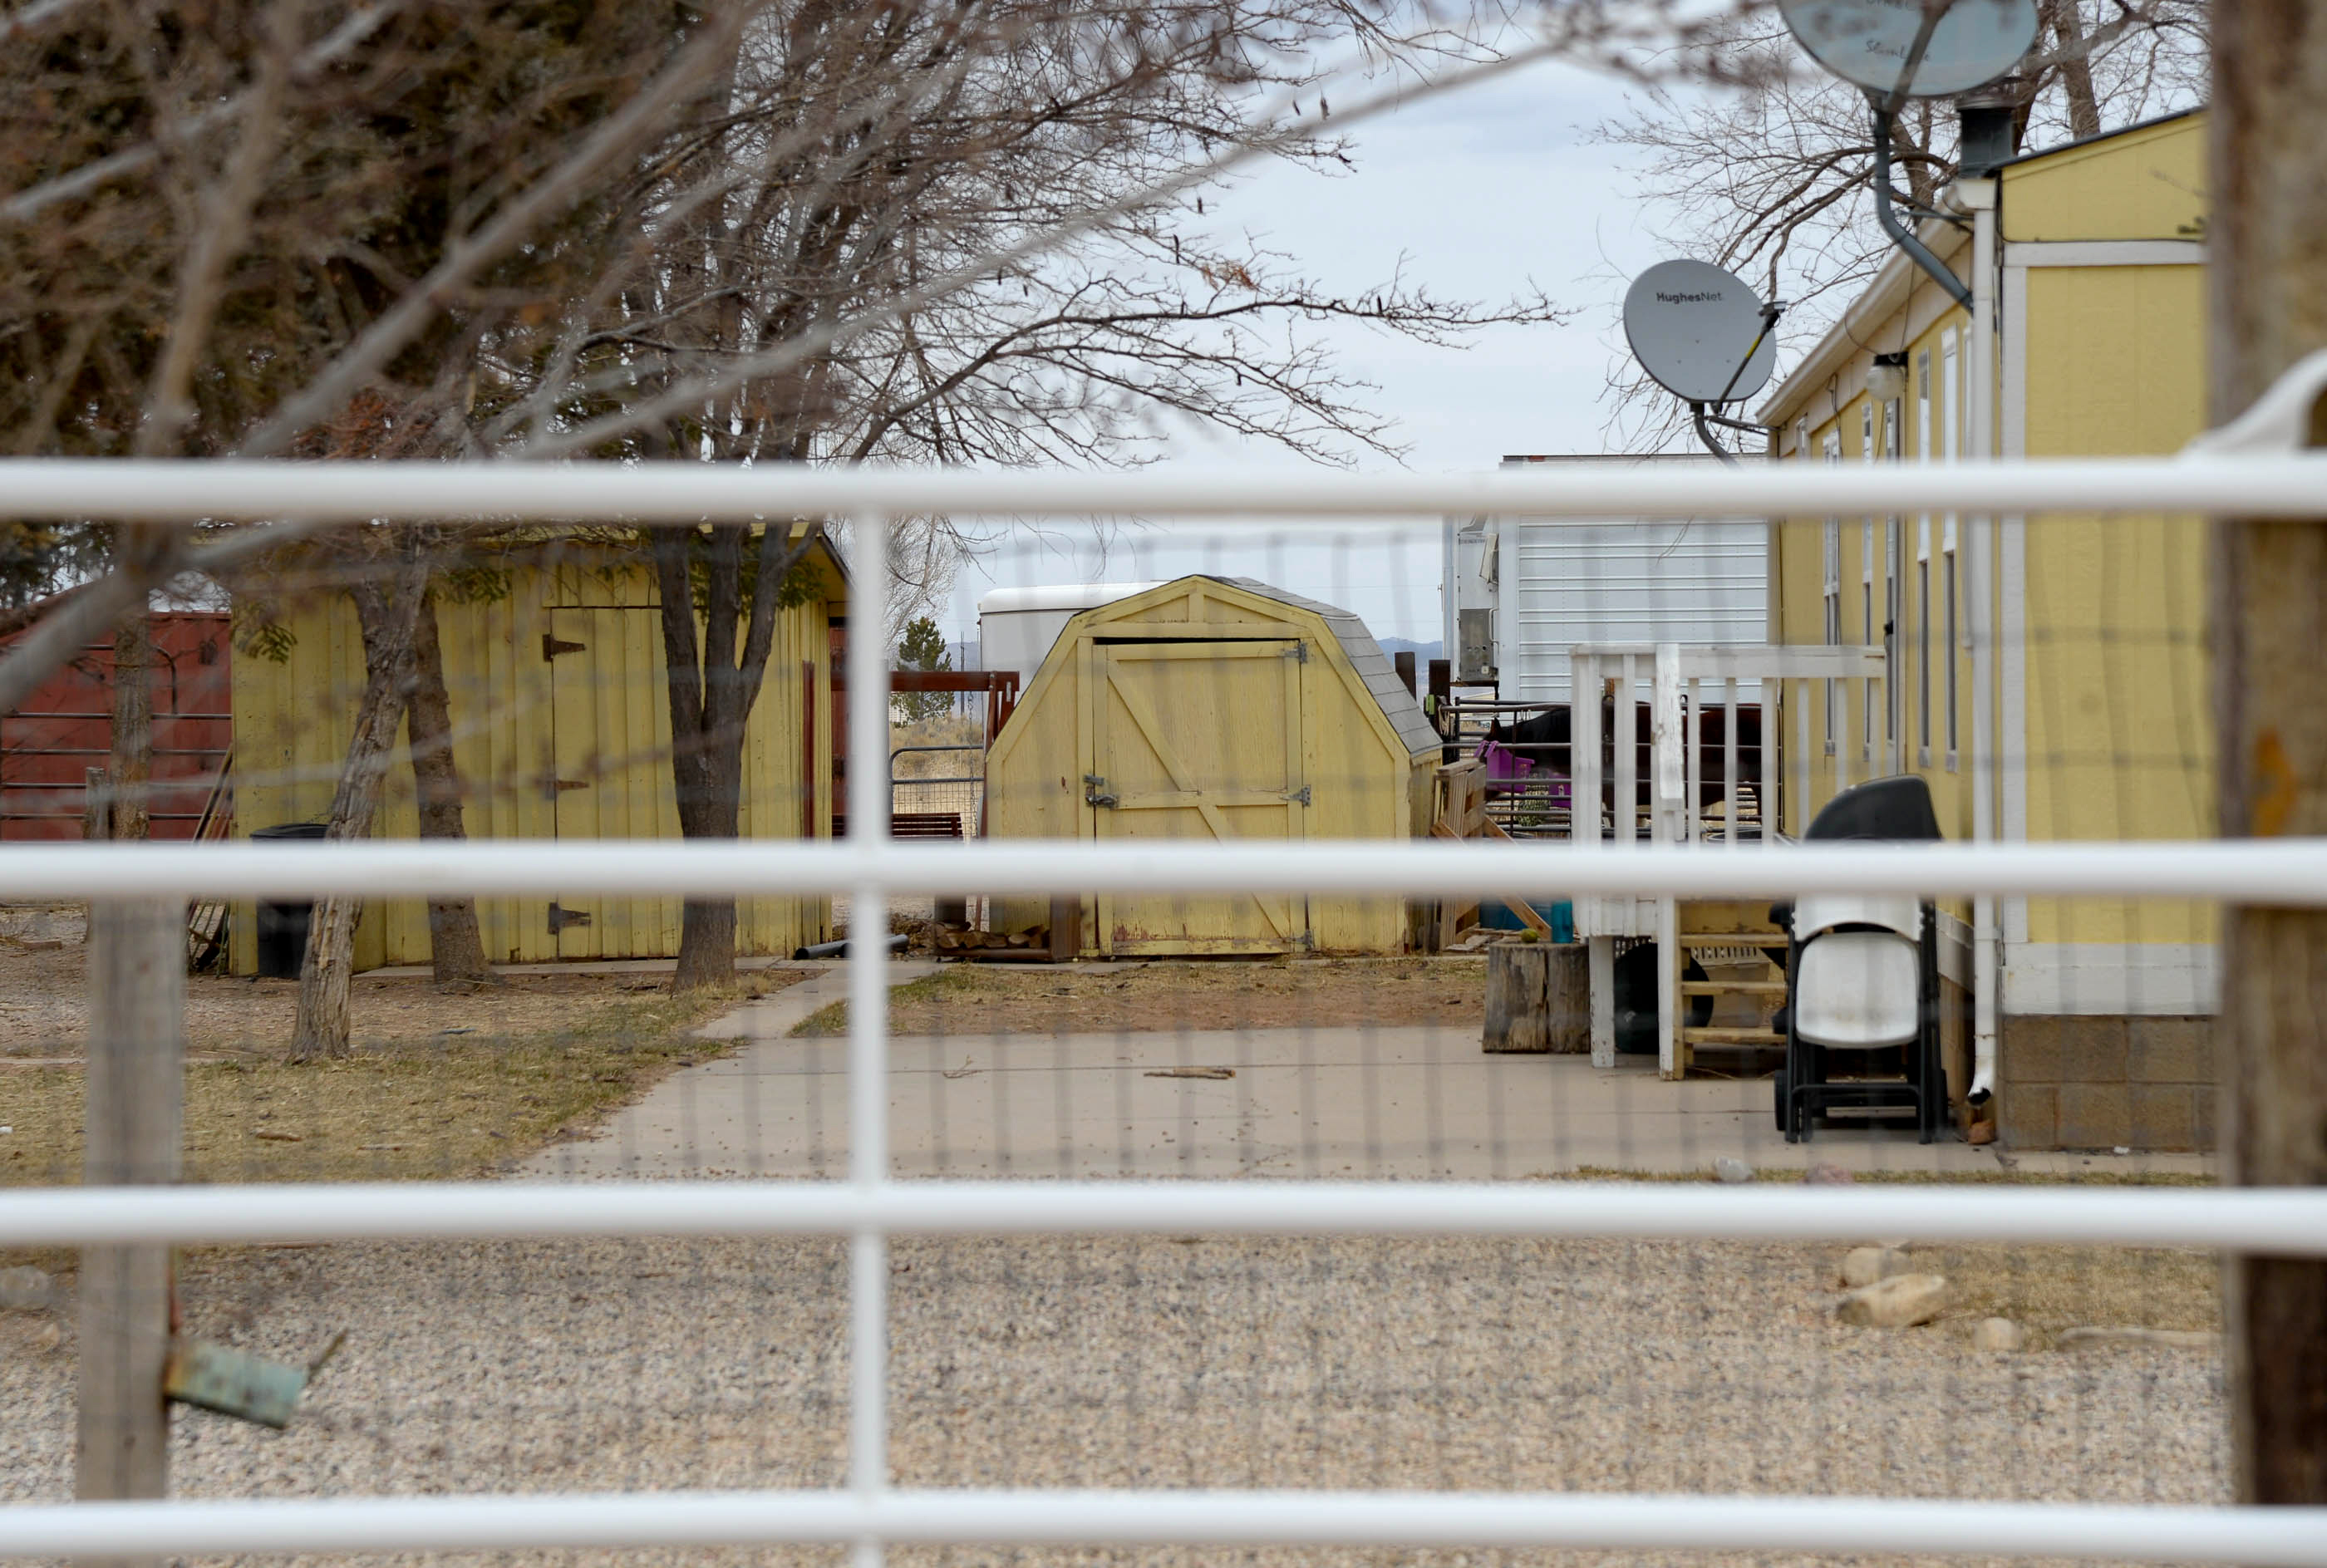 Teen Girl Tied - A girl, her hands zip tied, was forced to sit in a horse trough at a Utah  'troubled-teen' center